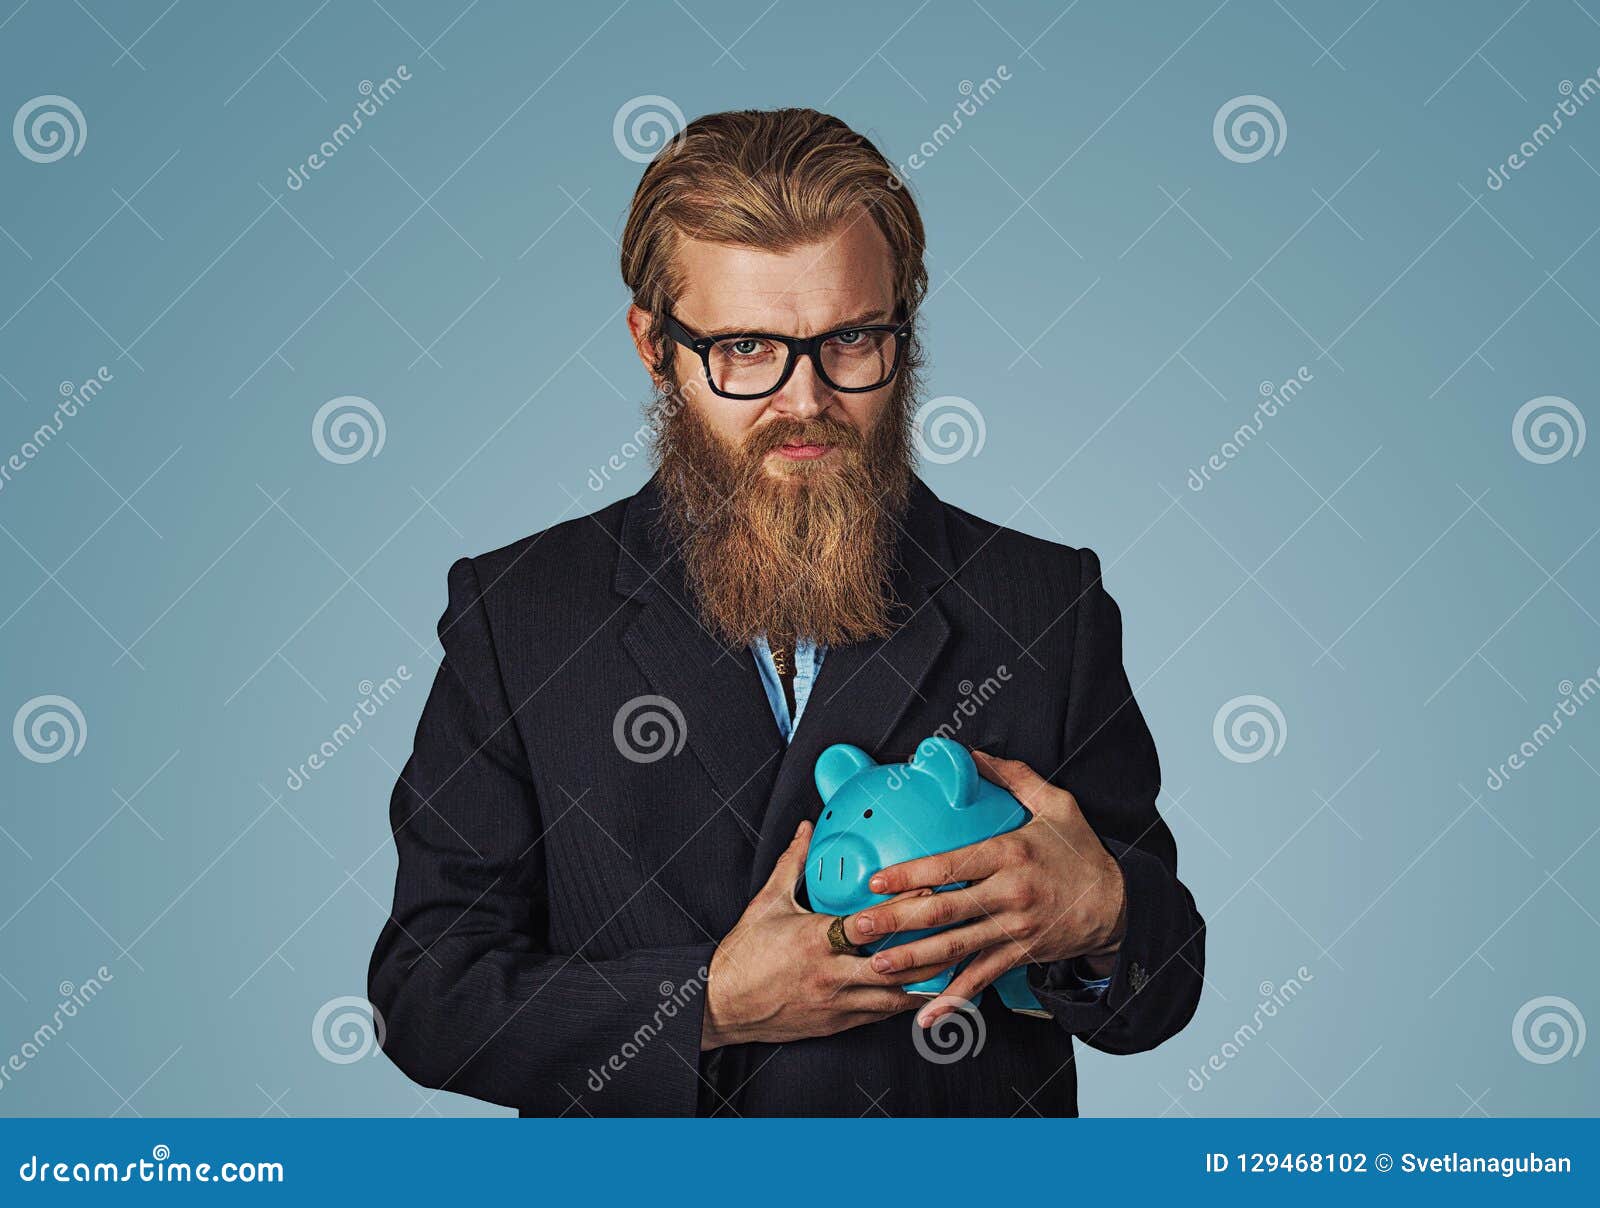 young greedy stingy business man holding piggy bank